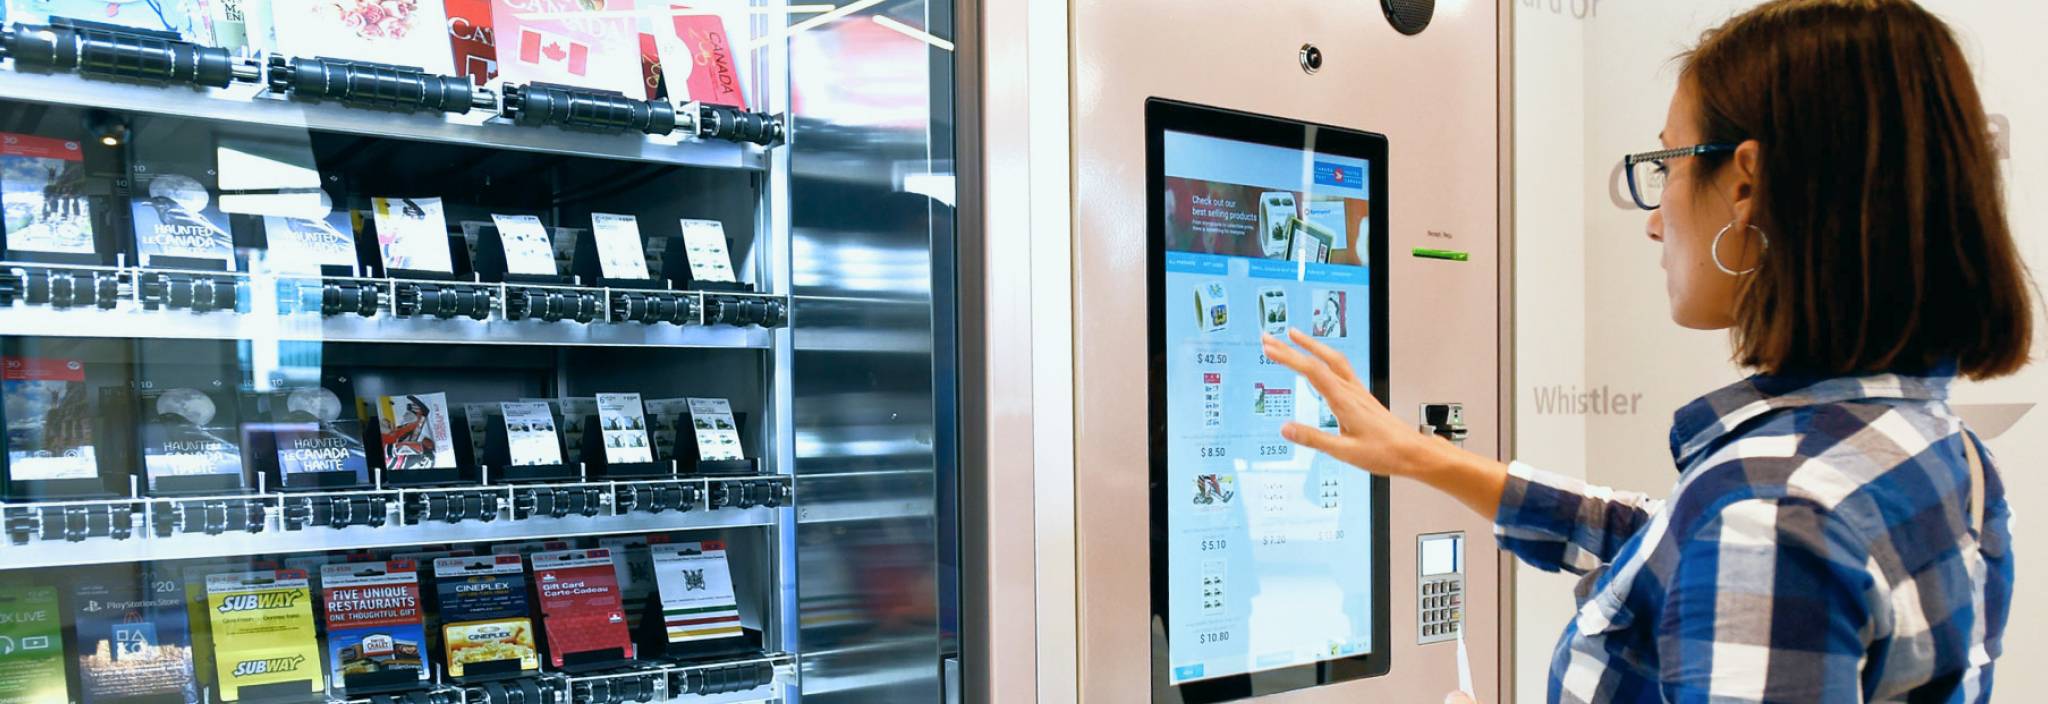 A woman uses a touchscreen to purchase a gift card from a Canada Post self-serve vending machine.